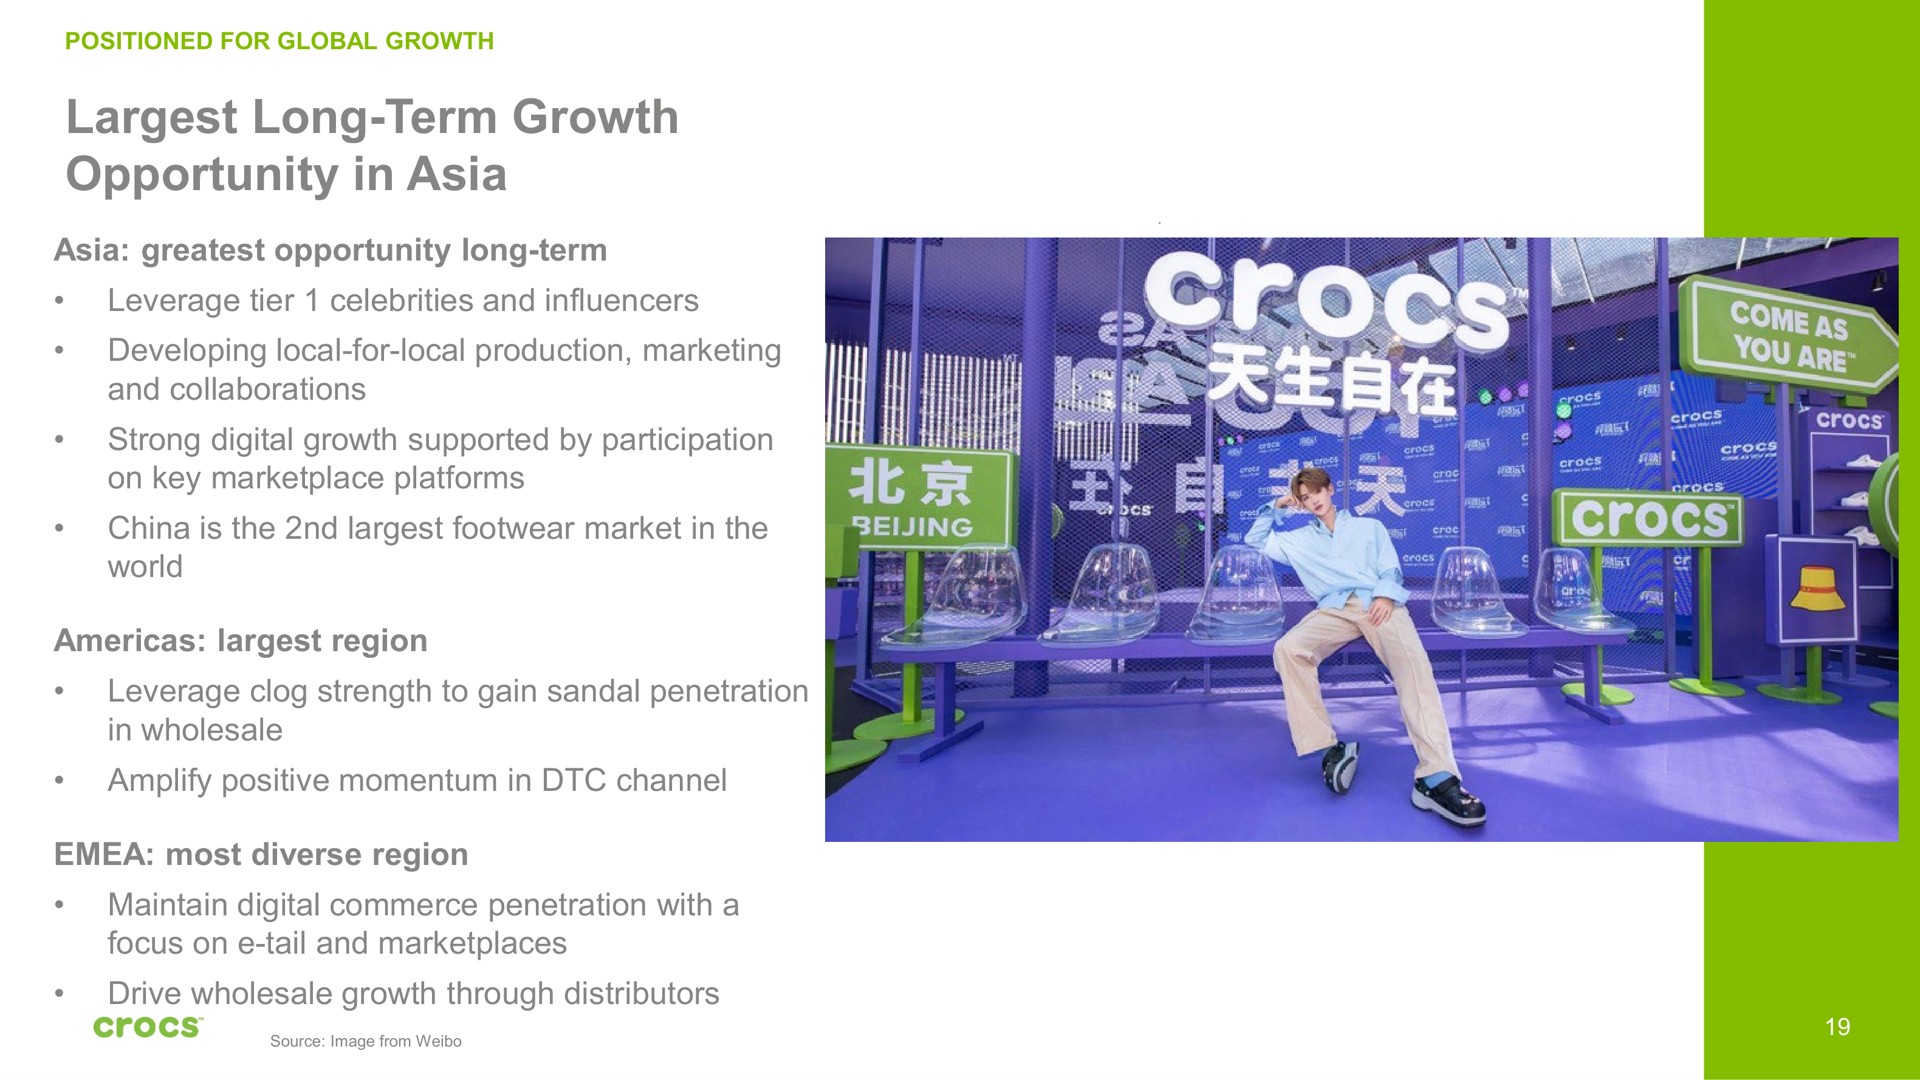 long term growth opportunity in on key platforms china is the footwear market the world its you are ocean roe i pit | Crocs